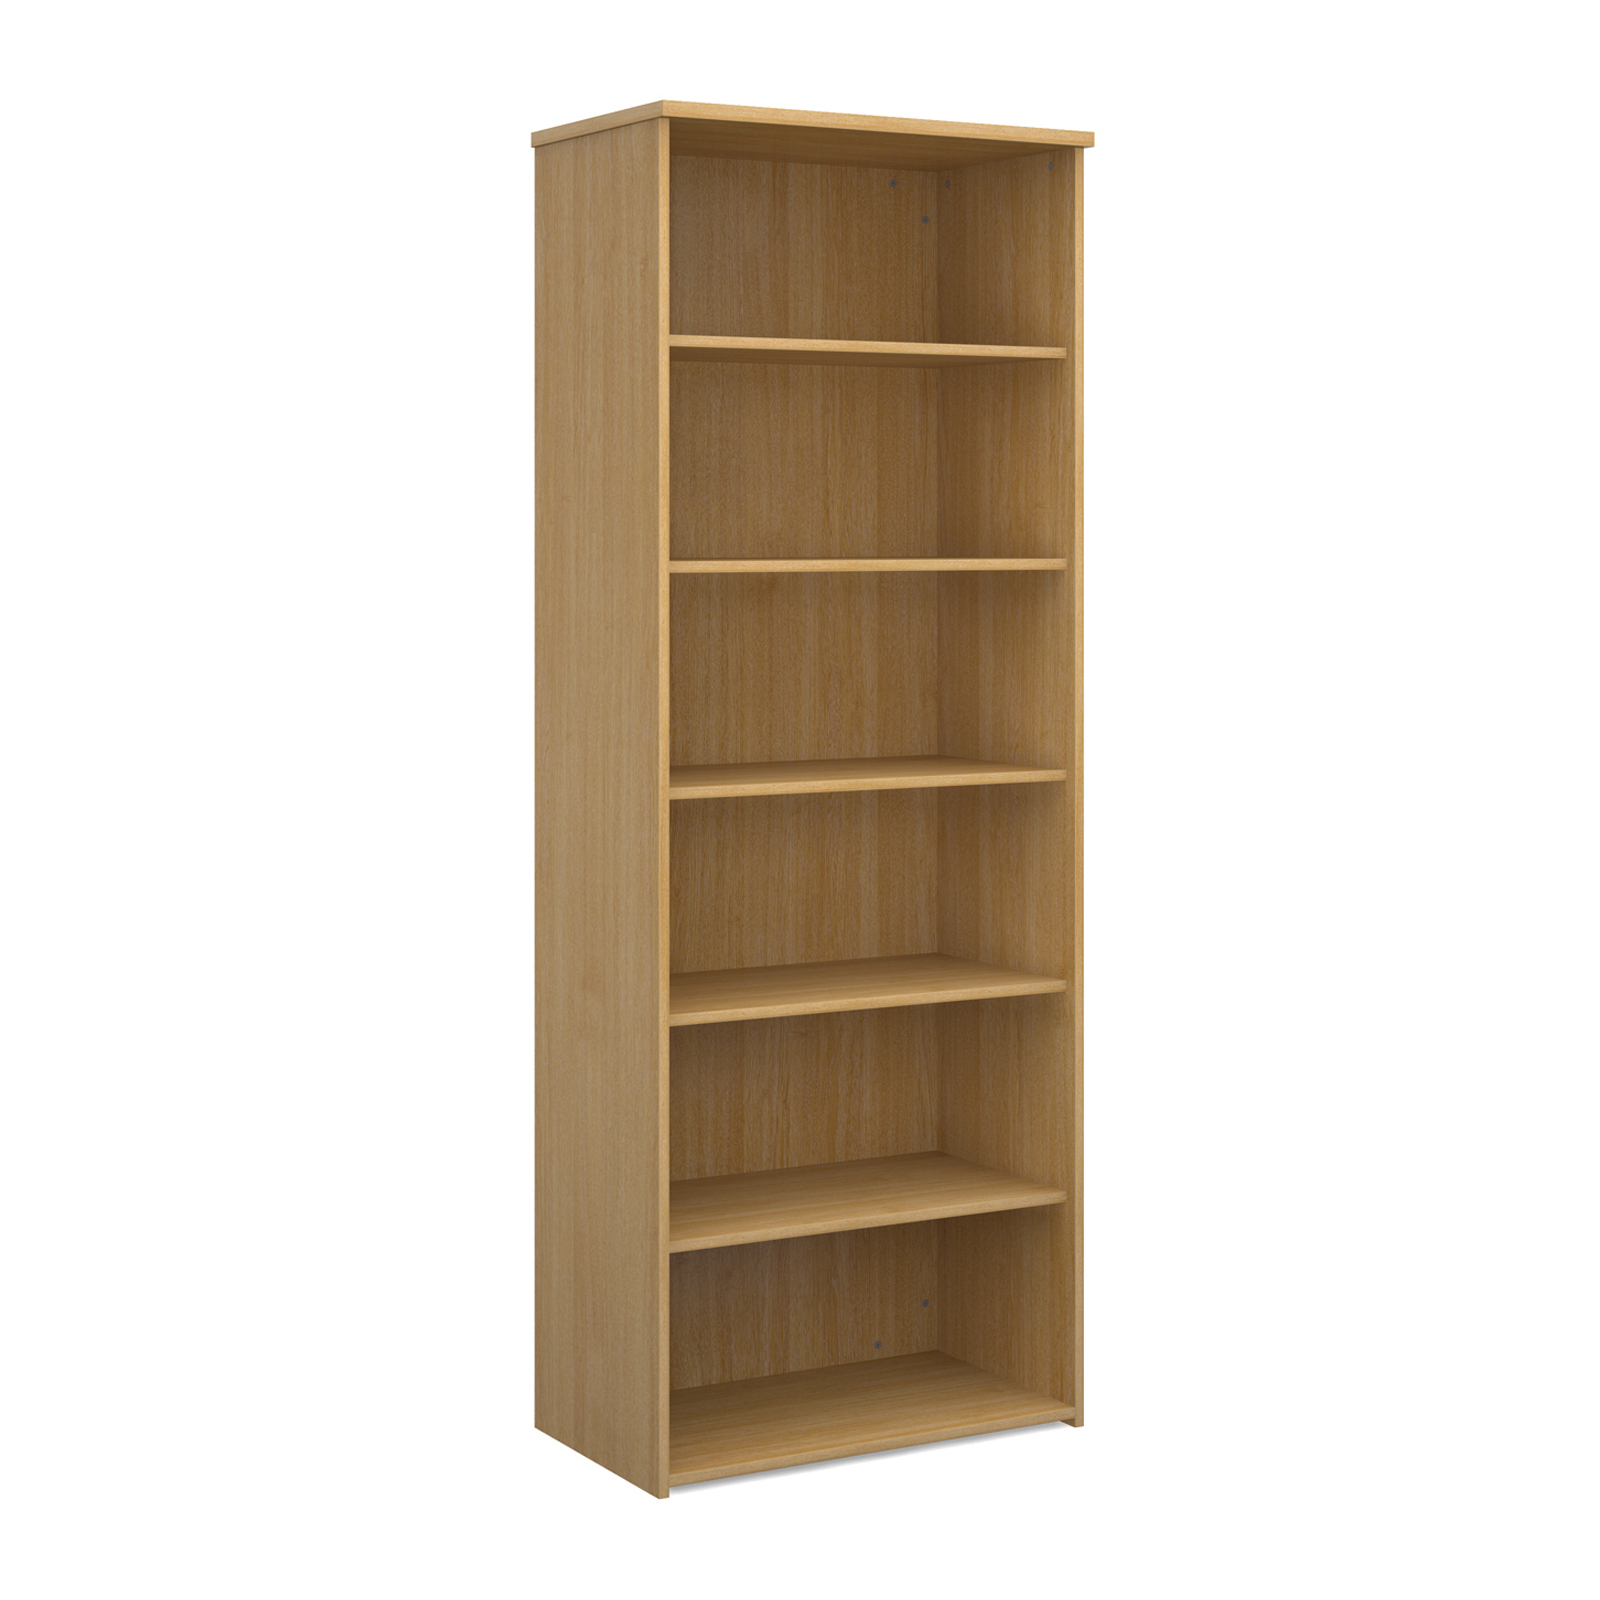 Over 1200mm High Universal bookcase 2140mm high with 5 shelves - oak